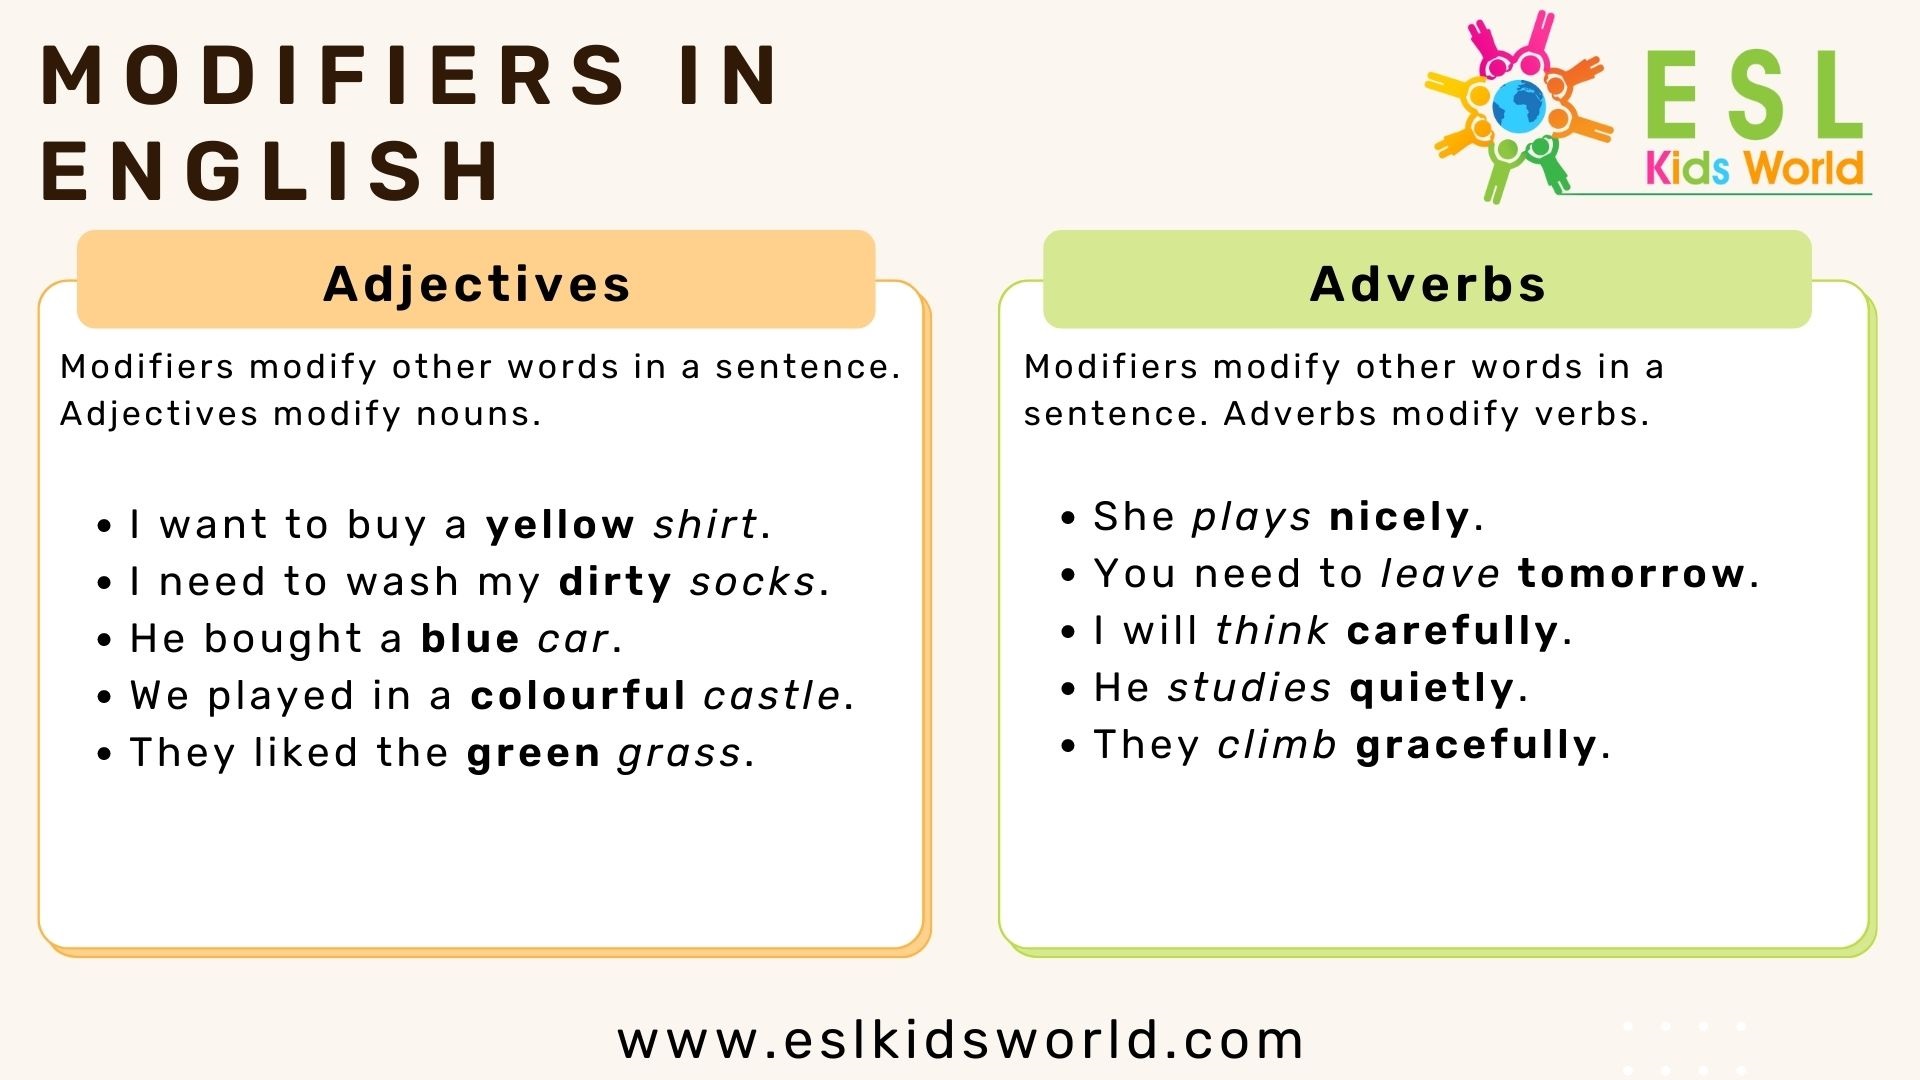 modifier-examples-what-is-a-modifier-esl-kids-world